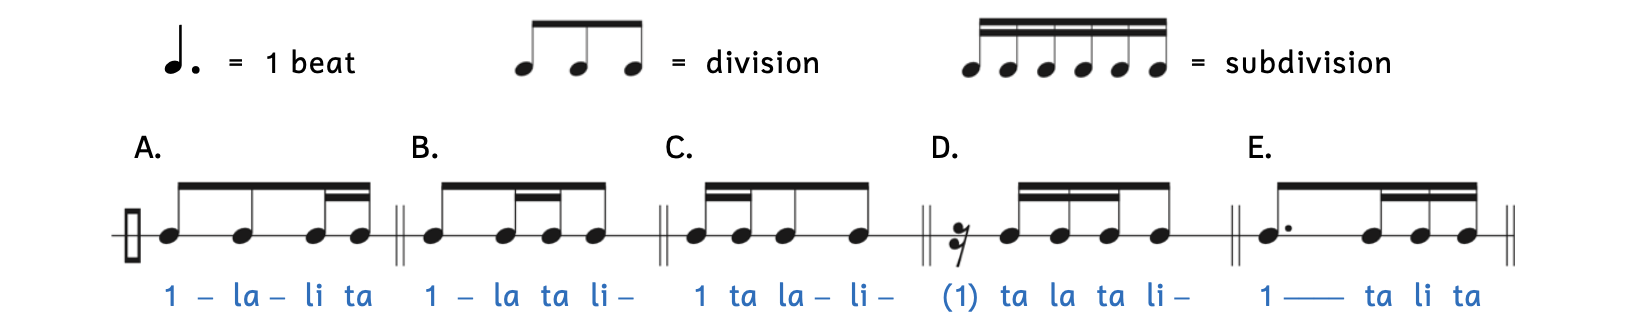 Correctly writing rhythms for a dotted-note beat. The dotted quarter note equals one beat, the division is three eighth notes, and the subdivision is six sixteenth notes. Example A is two eighth notes and two sixteenth notes beamed together. Example B is an eighth note, two sixteenth notes and an eighth note beamed together. Example C is two sixteenth notes and two eighth notes beamed together. Example D is a sixteenth rest followed by three sixteenth notes and an eighth note beamed together. Example E is a dotted eighth note beamed to three sixteenth notes. Listen to the rhythm syllables in the sound clip below.